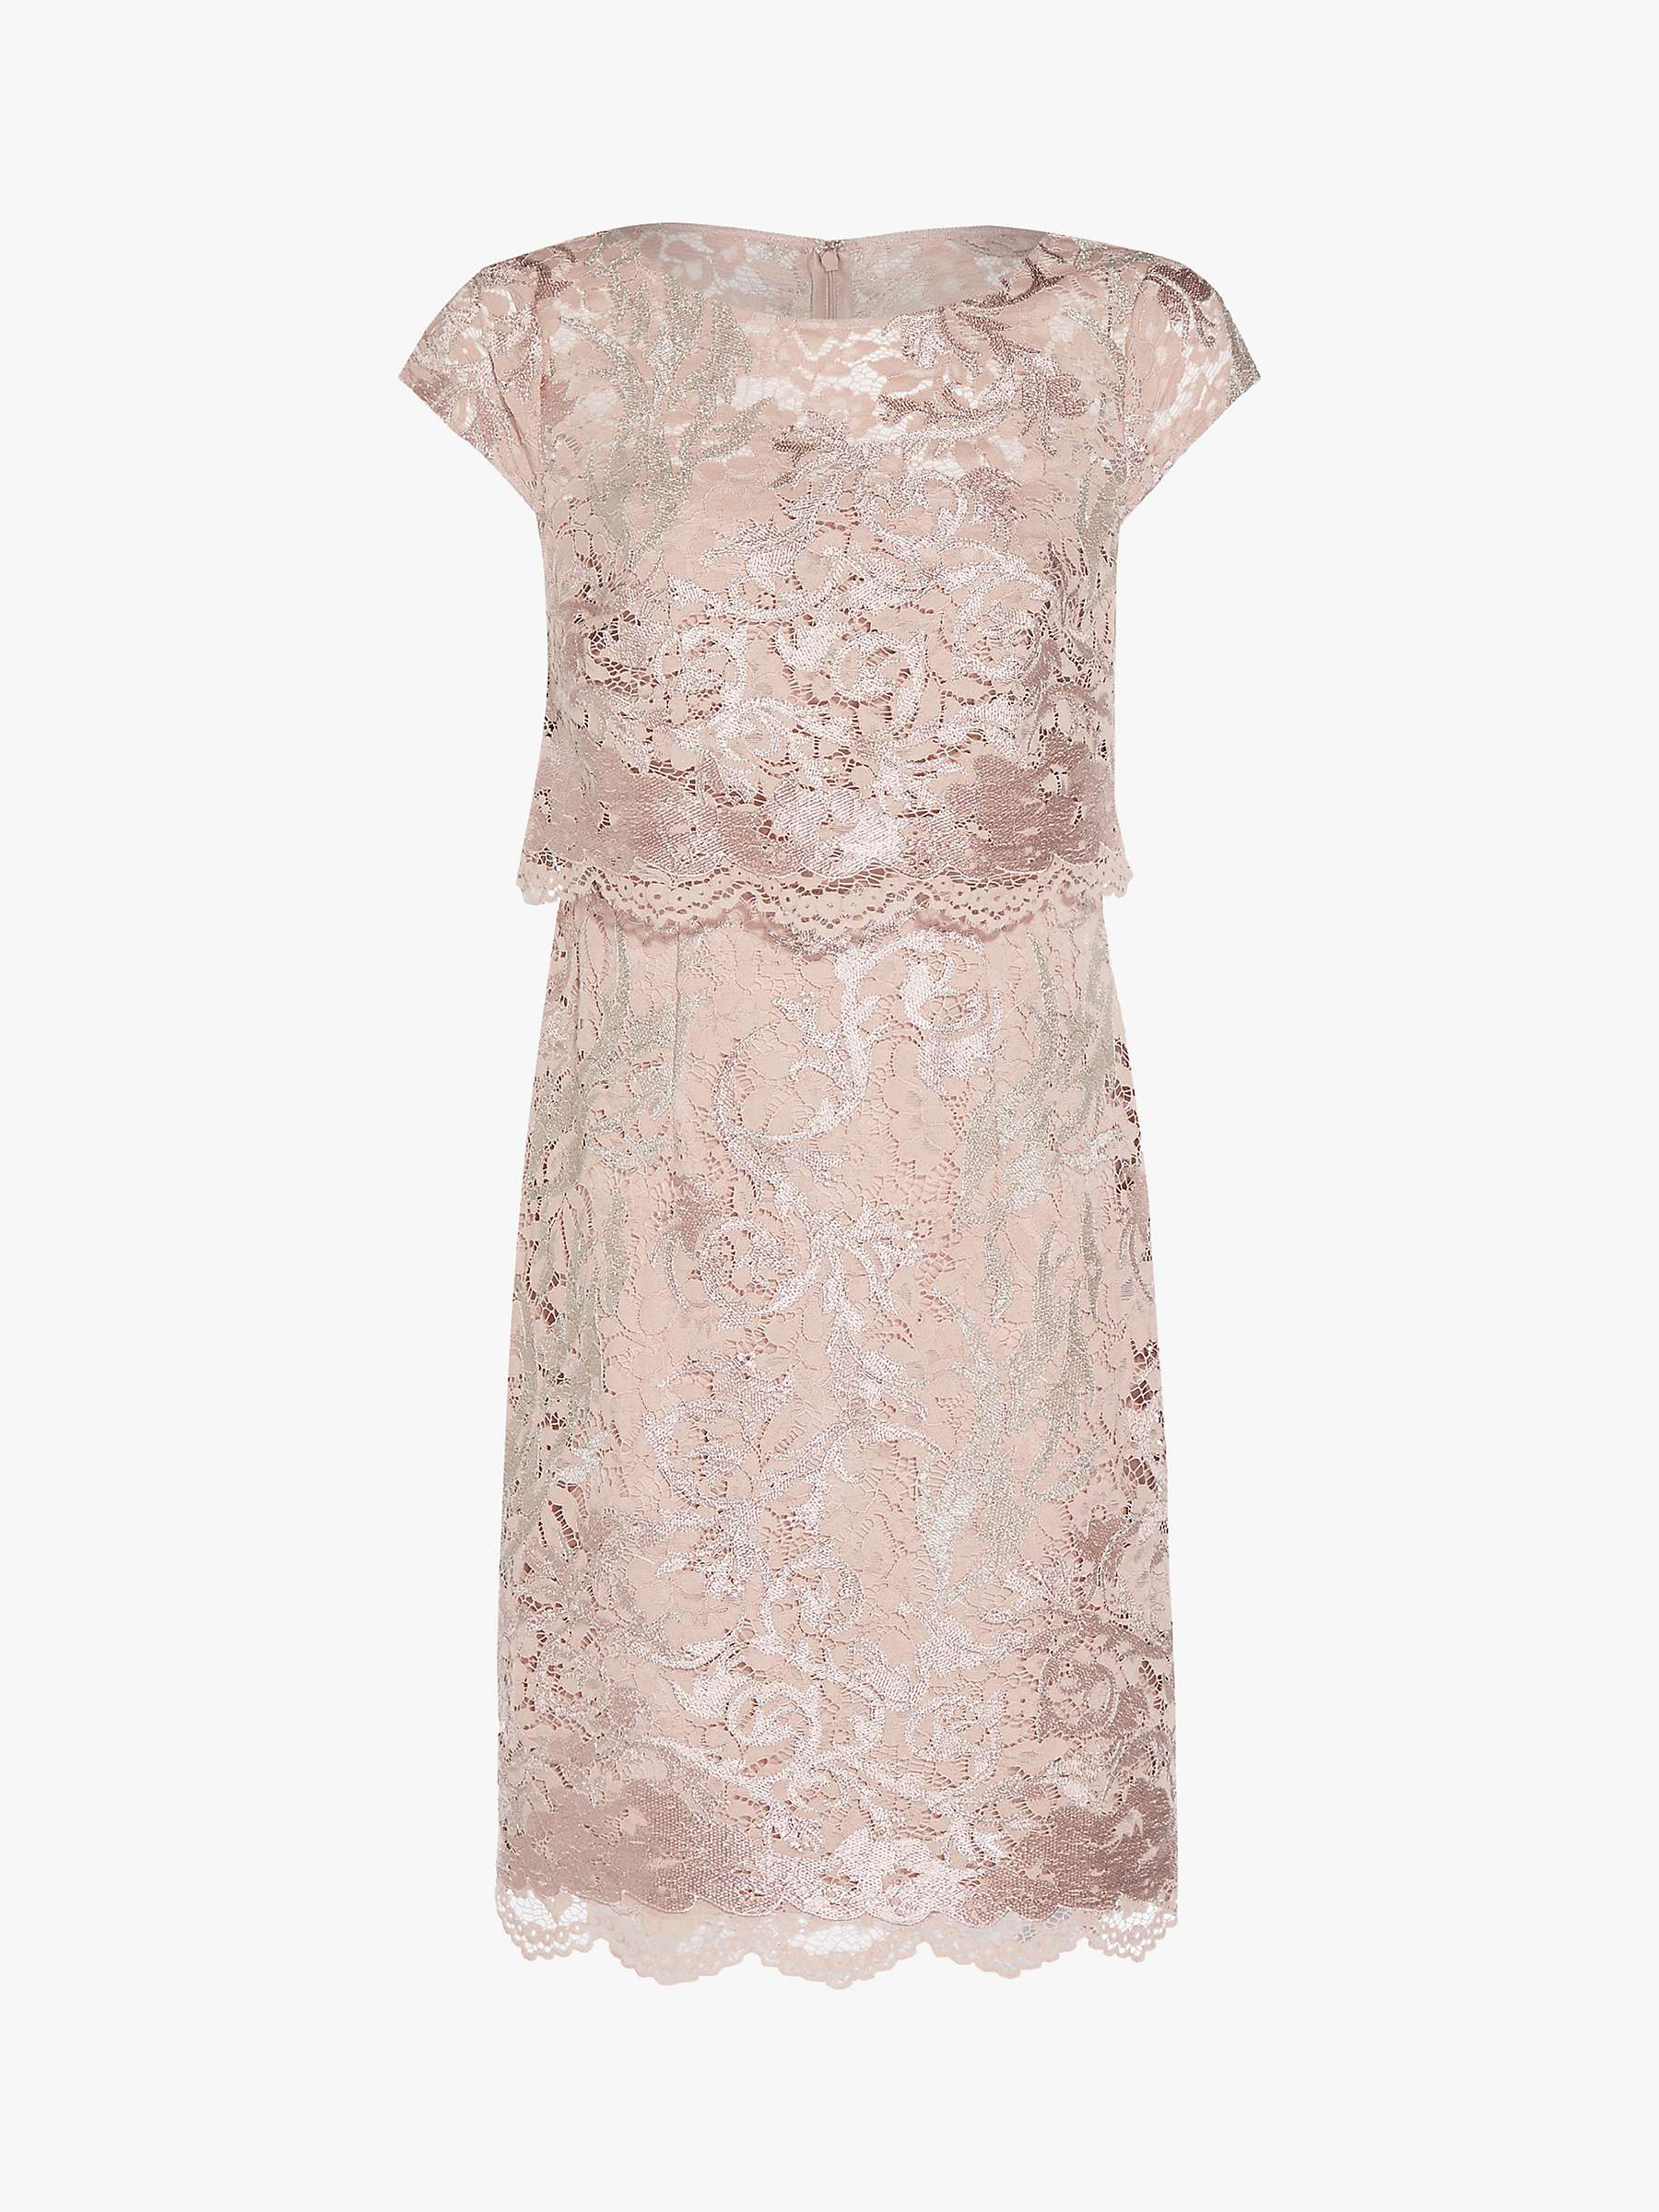 Buy Adrianna Papell Embroidered Lace Dress, Dusty Rose Online at johnlewis.com